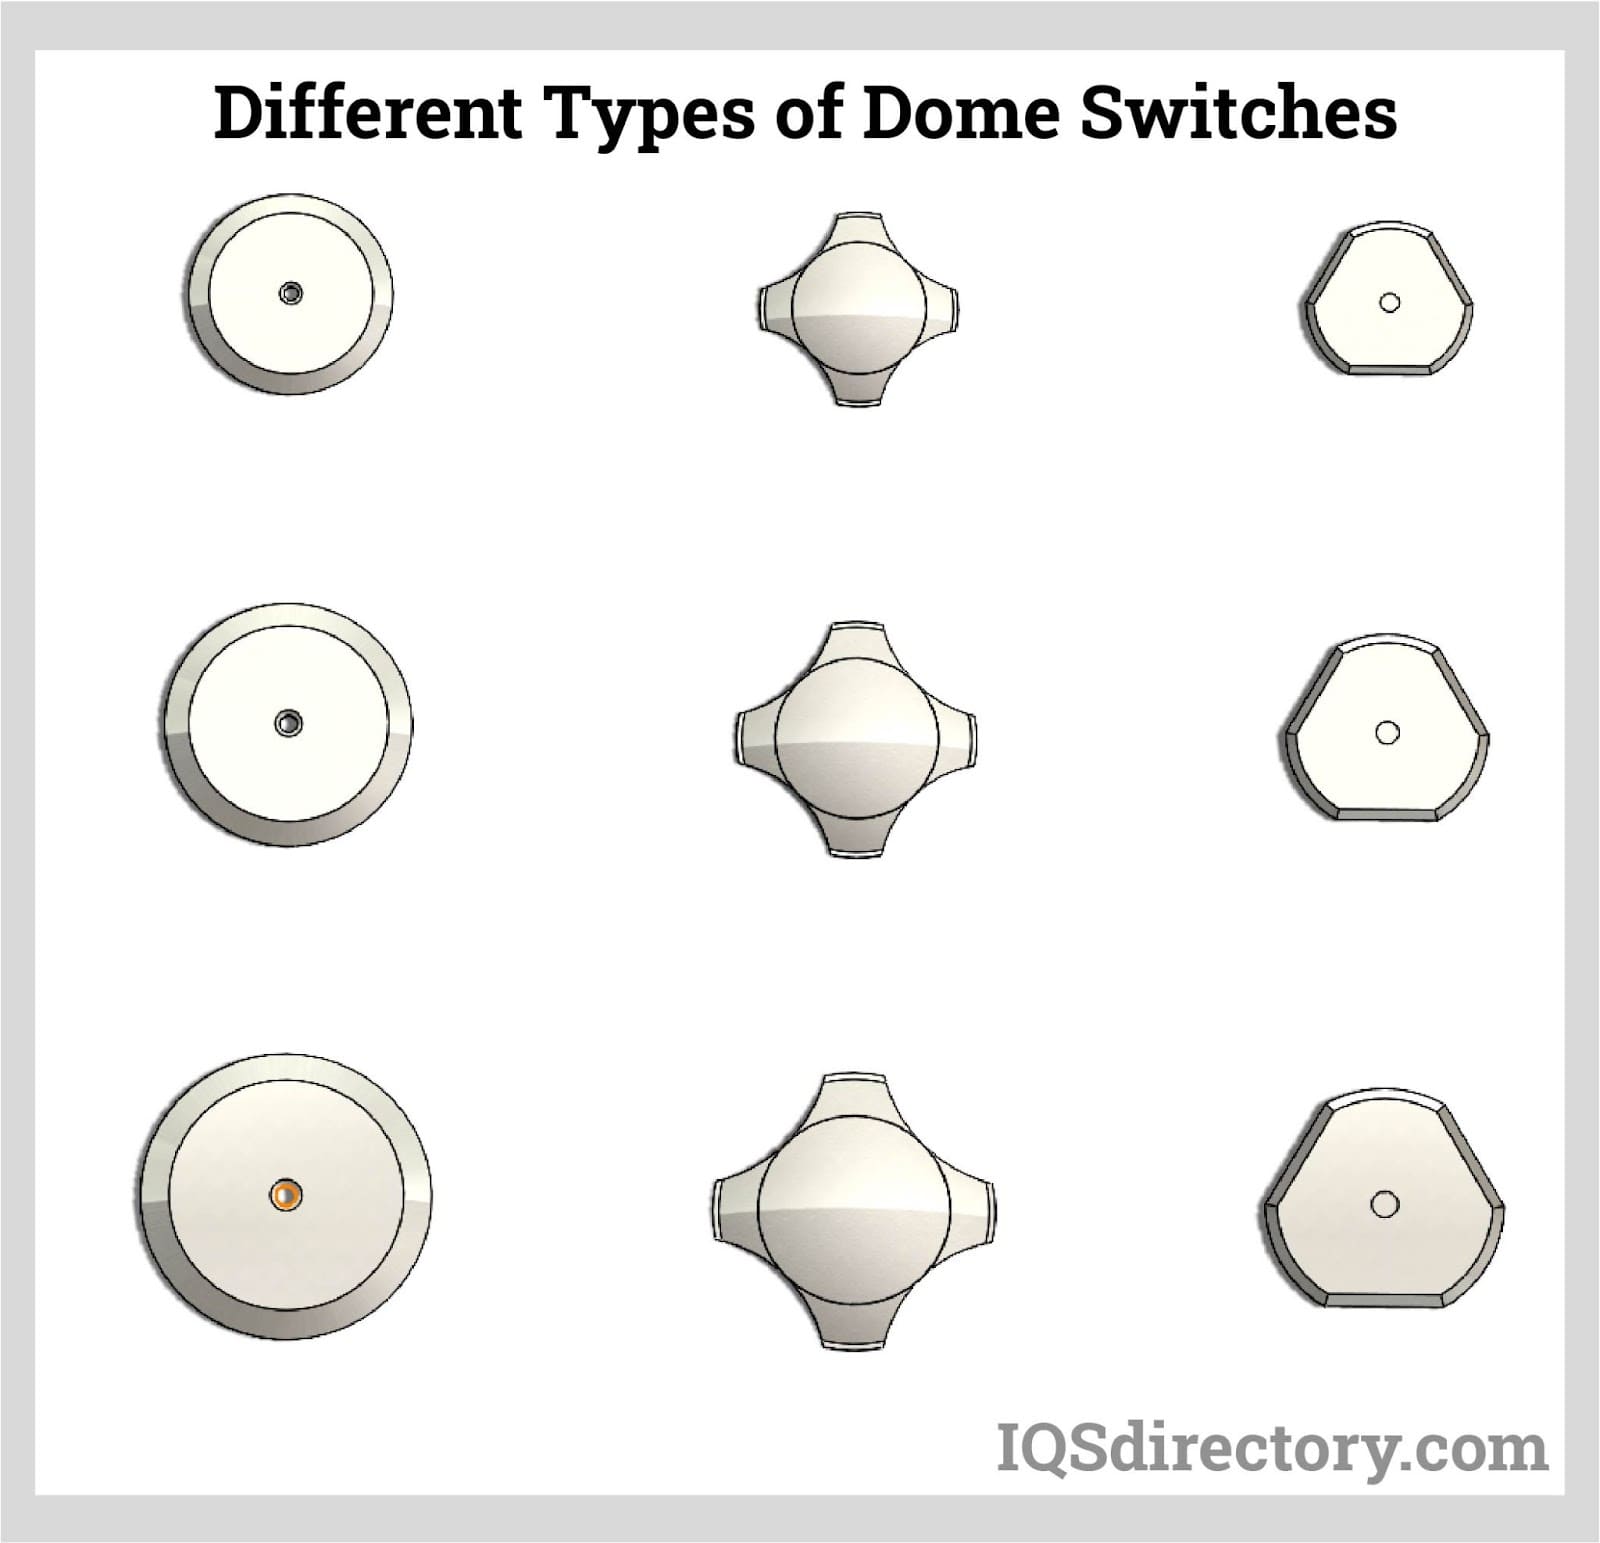 Different Types of Dome Switches